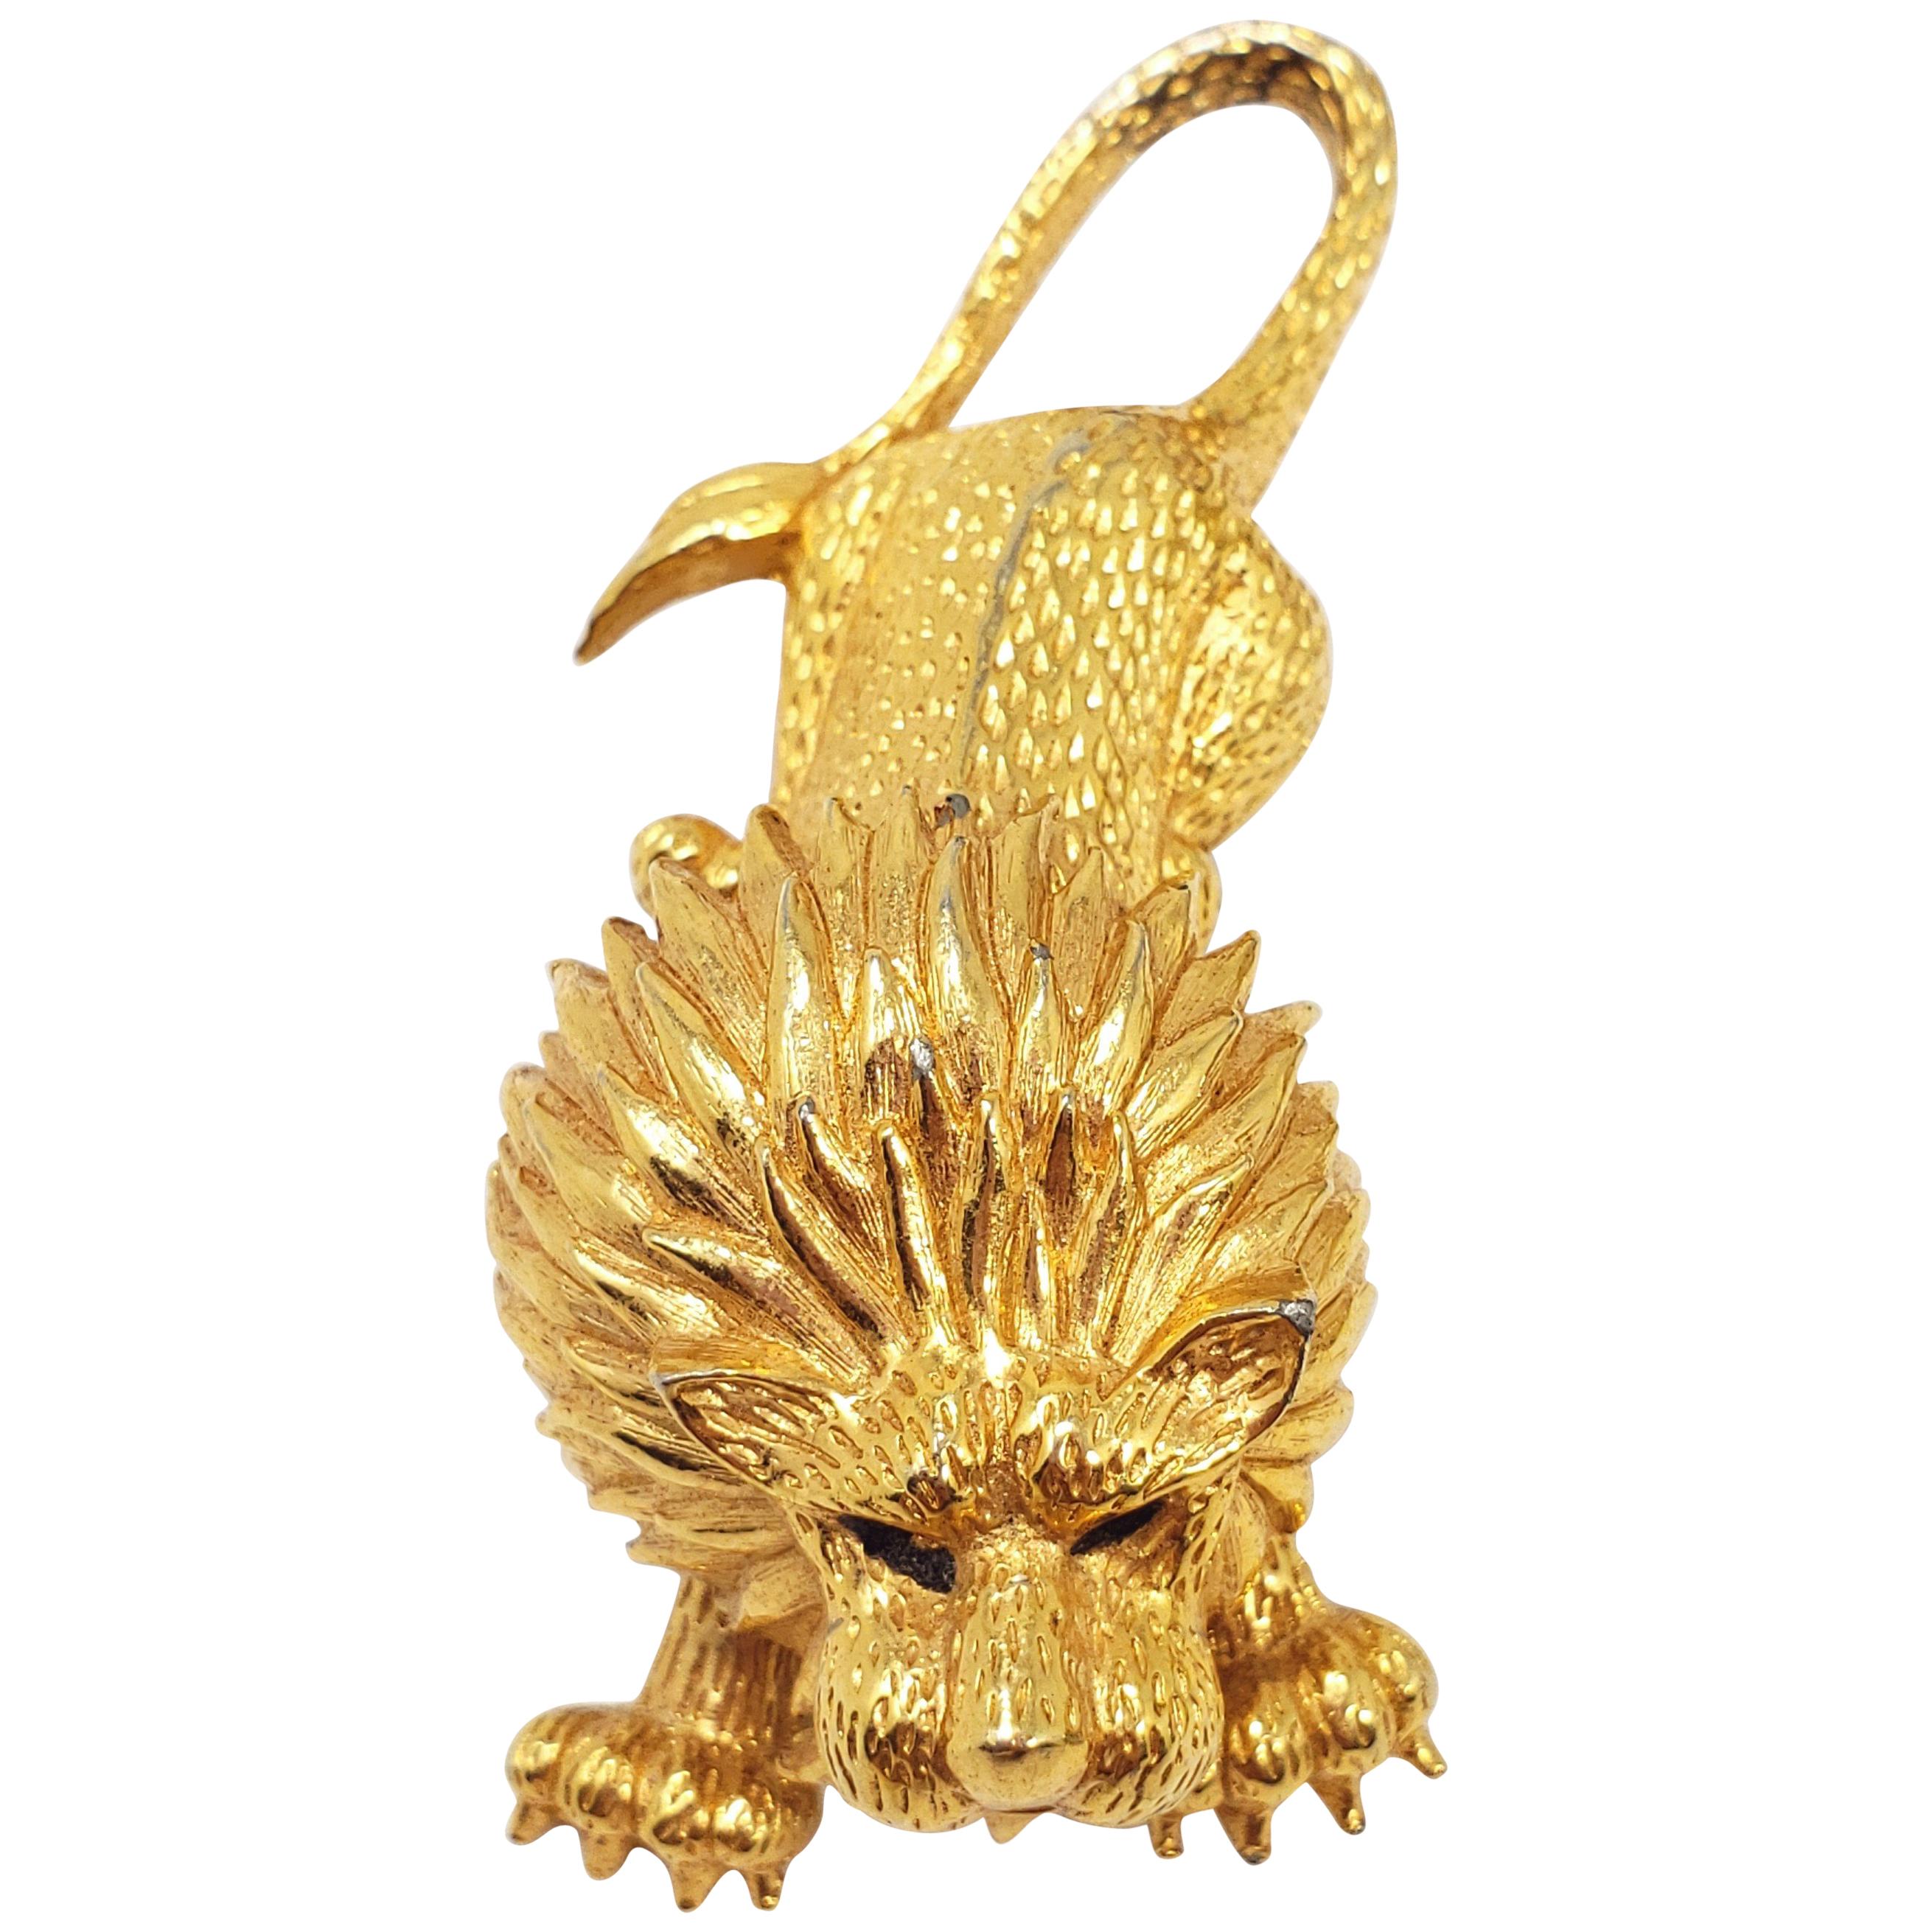 Vintage Jomaz Textured Lion Pin Brooch in Gold